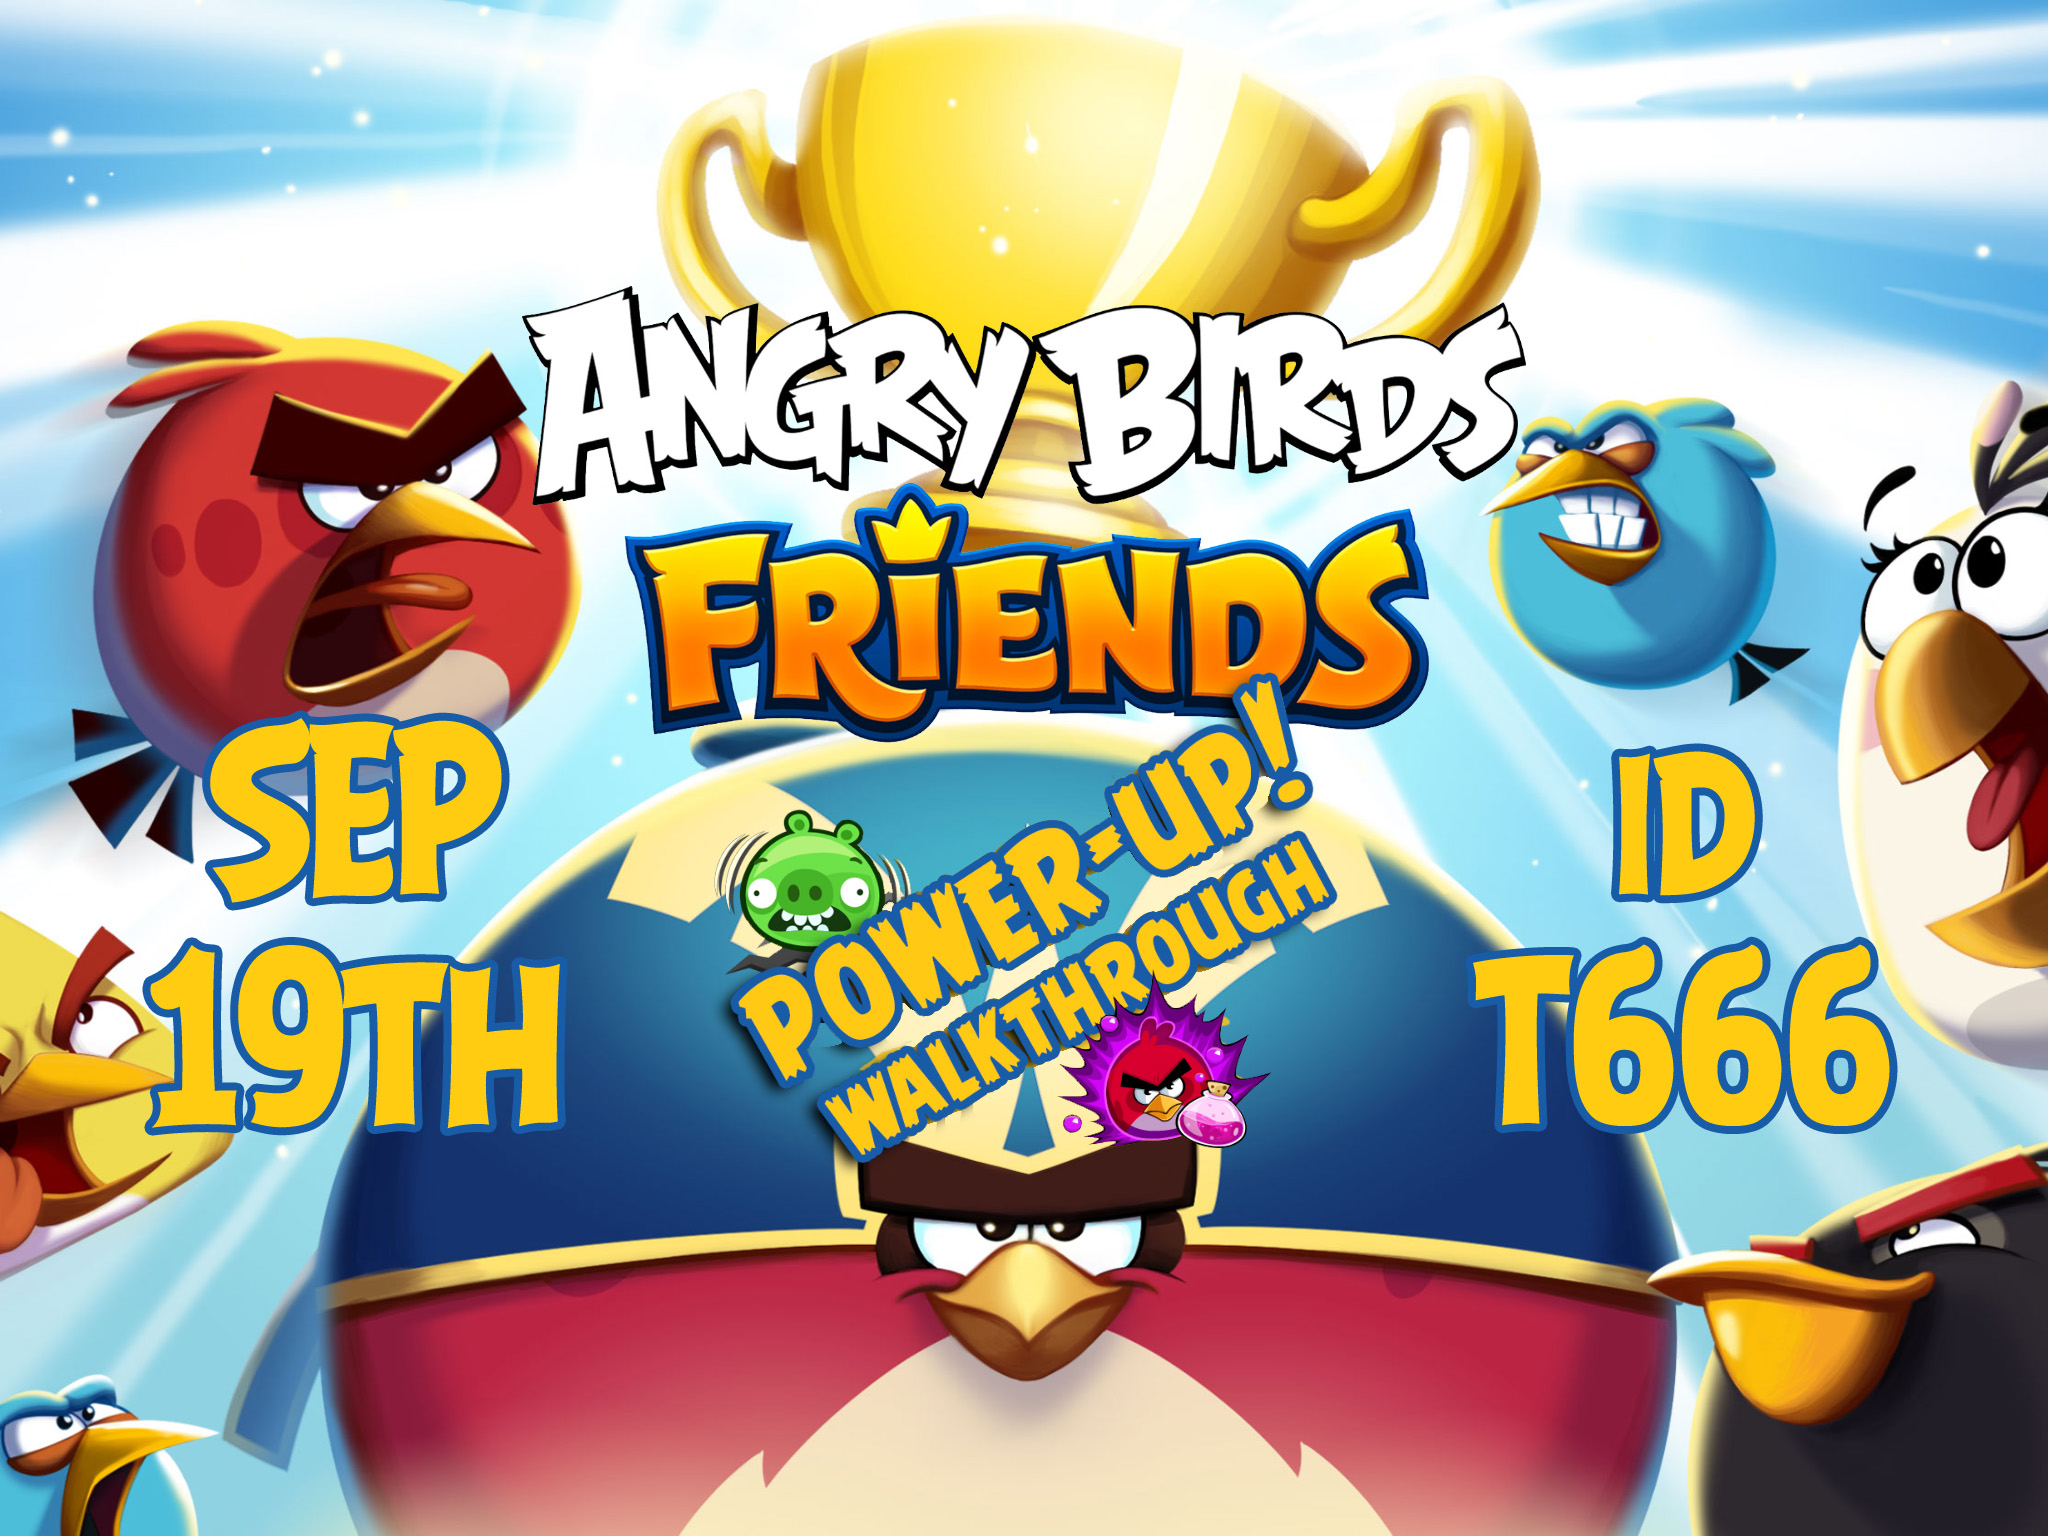 Angry-Birds-Friends-Tournament-T666-Feature-Image-PU